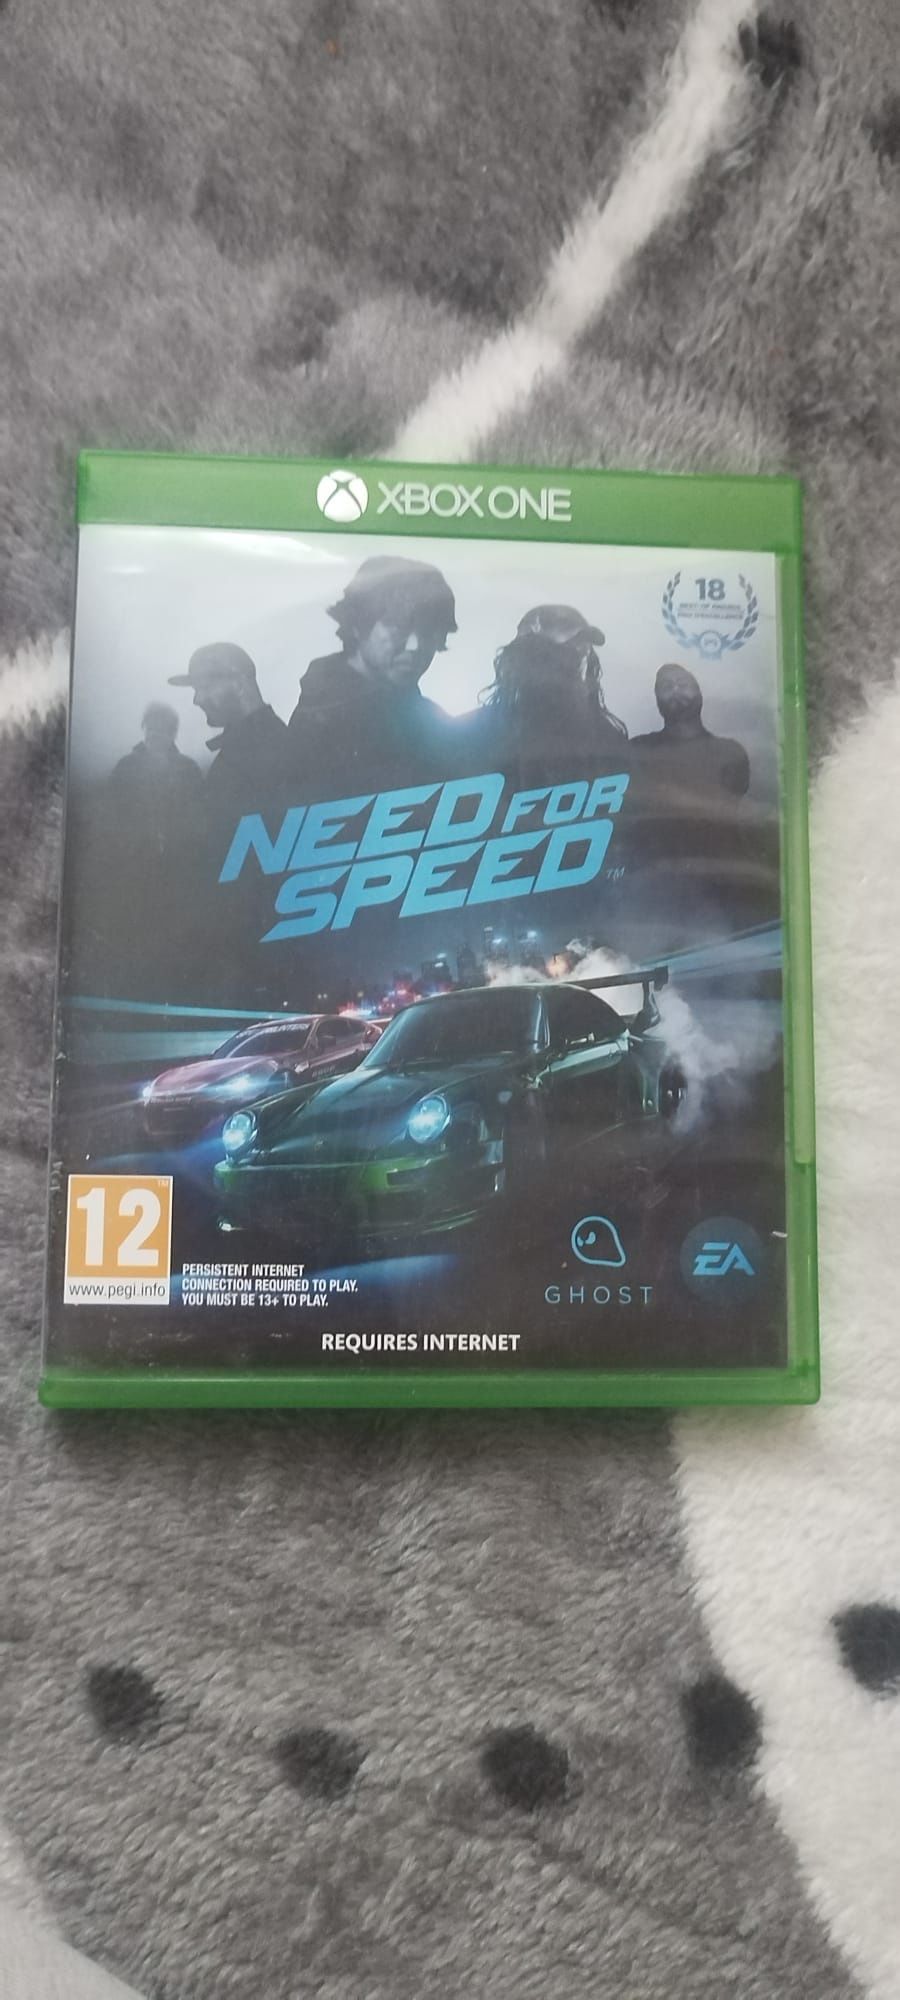 Need for speed xbox